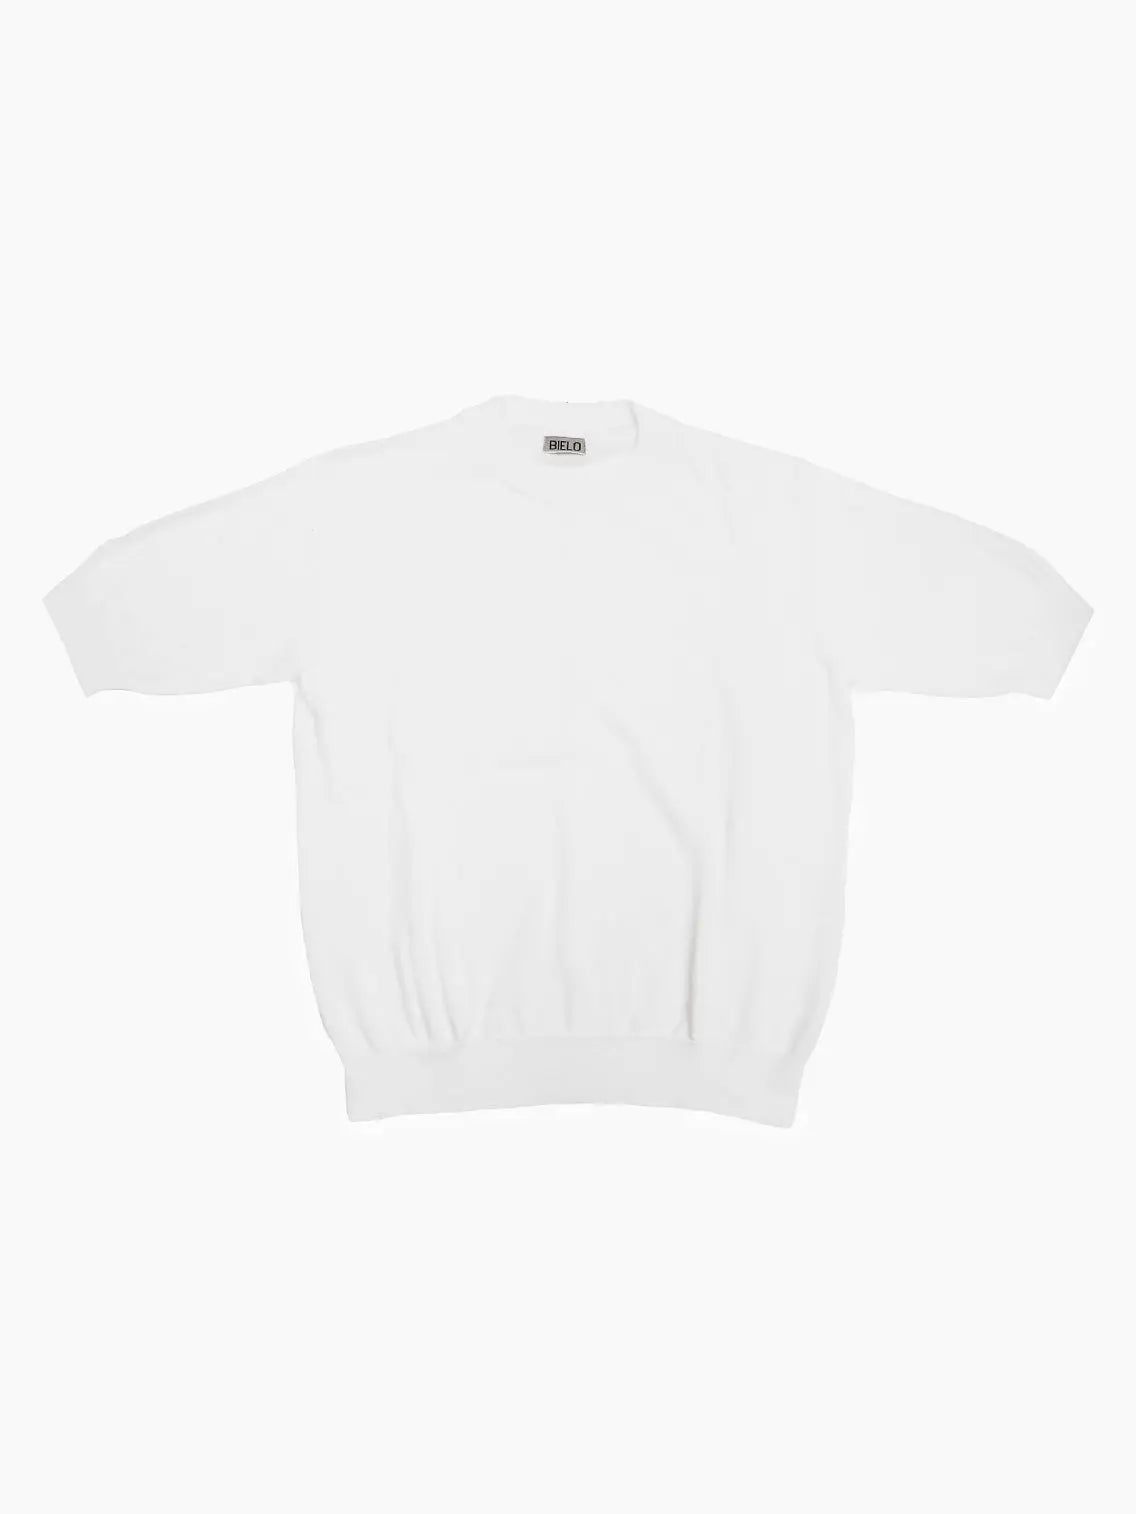 A plain white, long-sleeved sweater with a crew neck is displayed against a white background. The Cloud Crew Neck by Bielo, available at BassalStore, features ribbed cuffs and hem. The fabric appears soft and slightly stretchy.